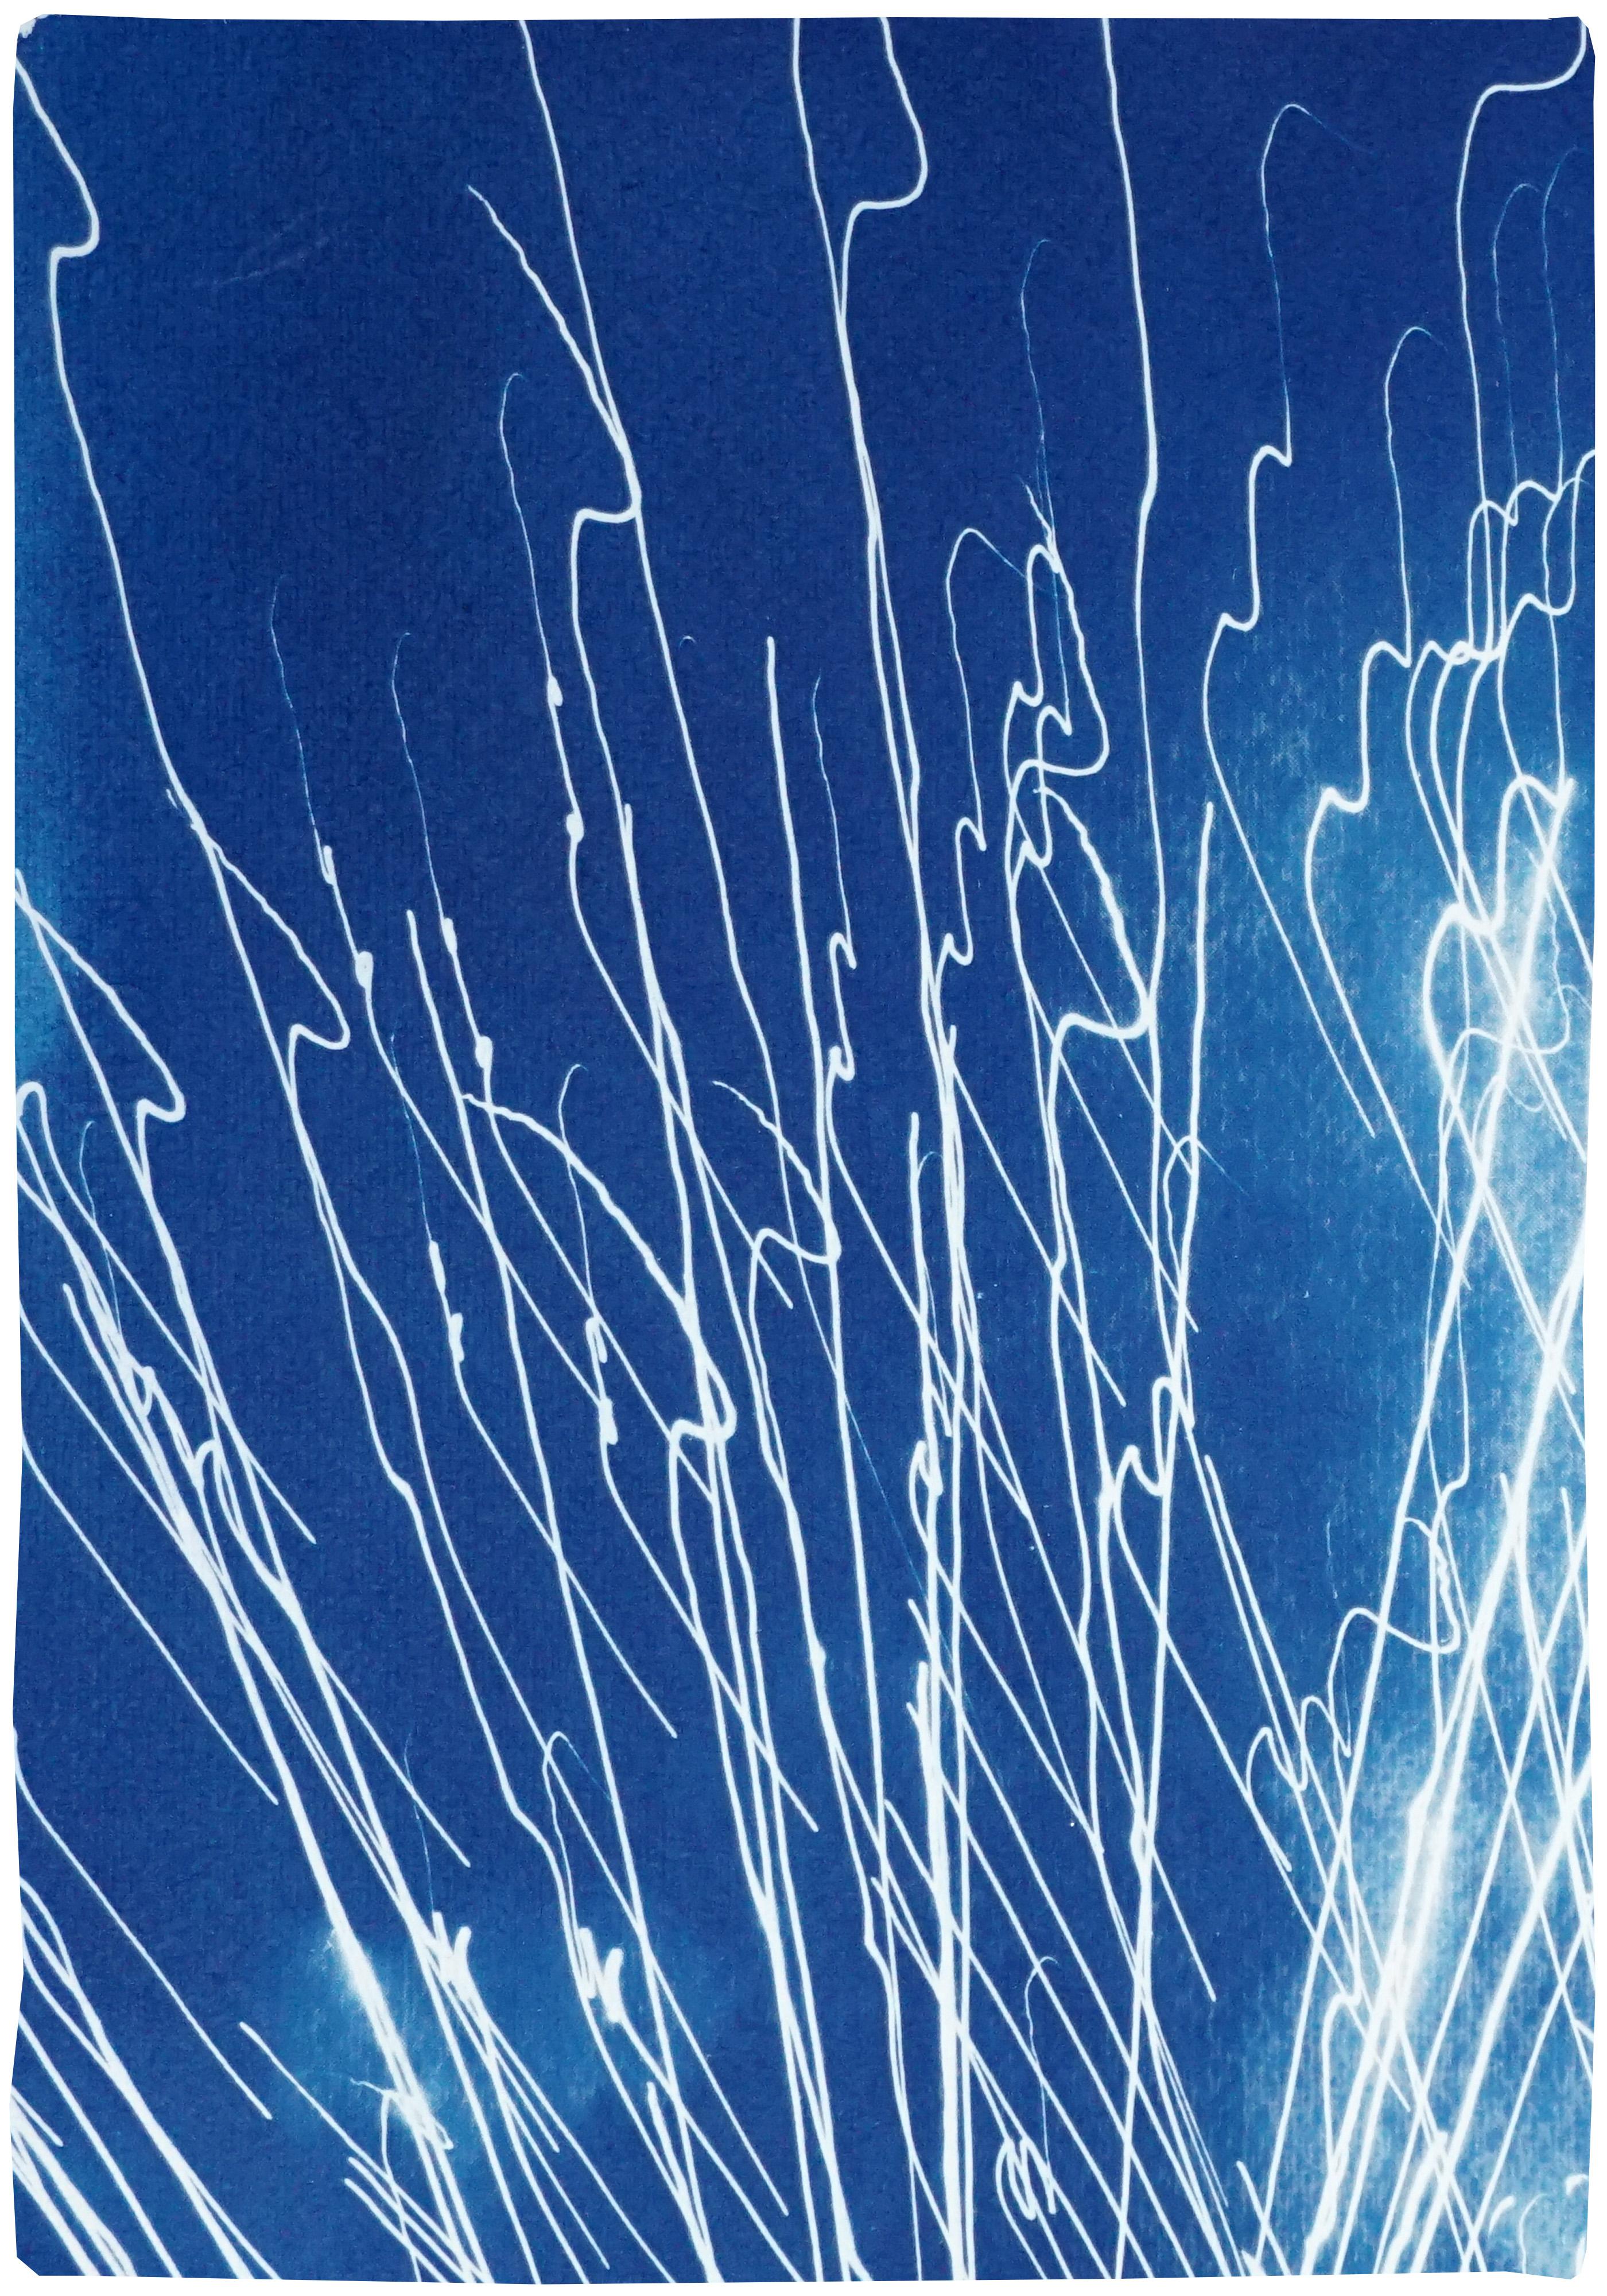 Fireworks Lights in Sky Blue Diptych, Handmade Cyanotype on Watercolor Paper  - Expressionist Print by Kind of Cyan